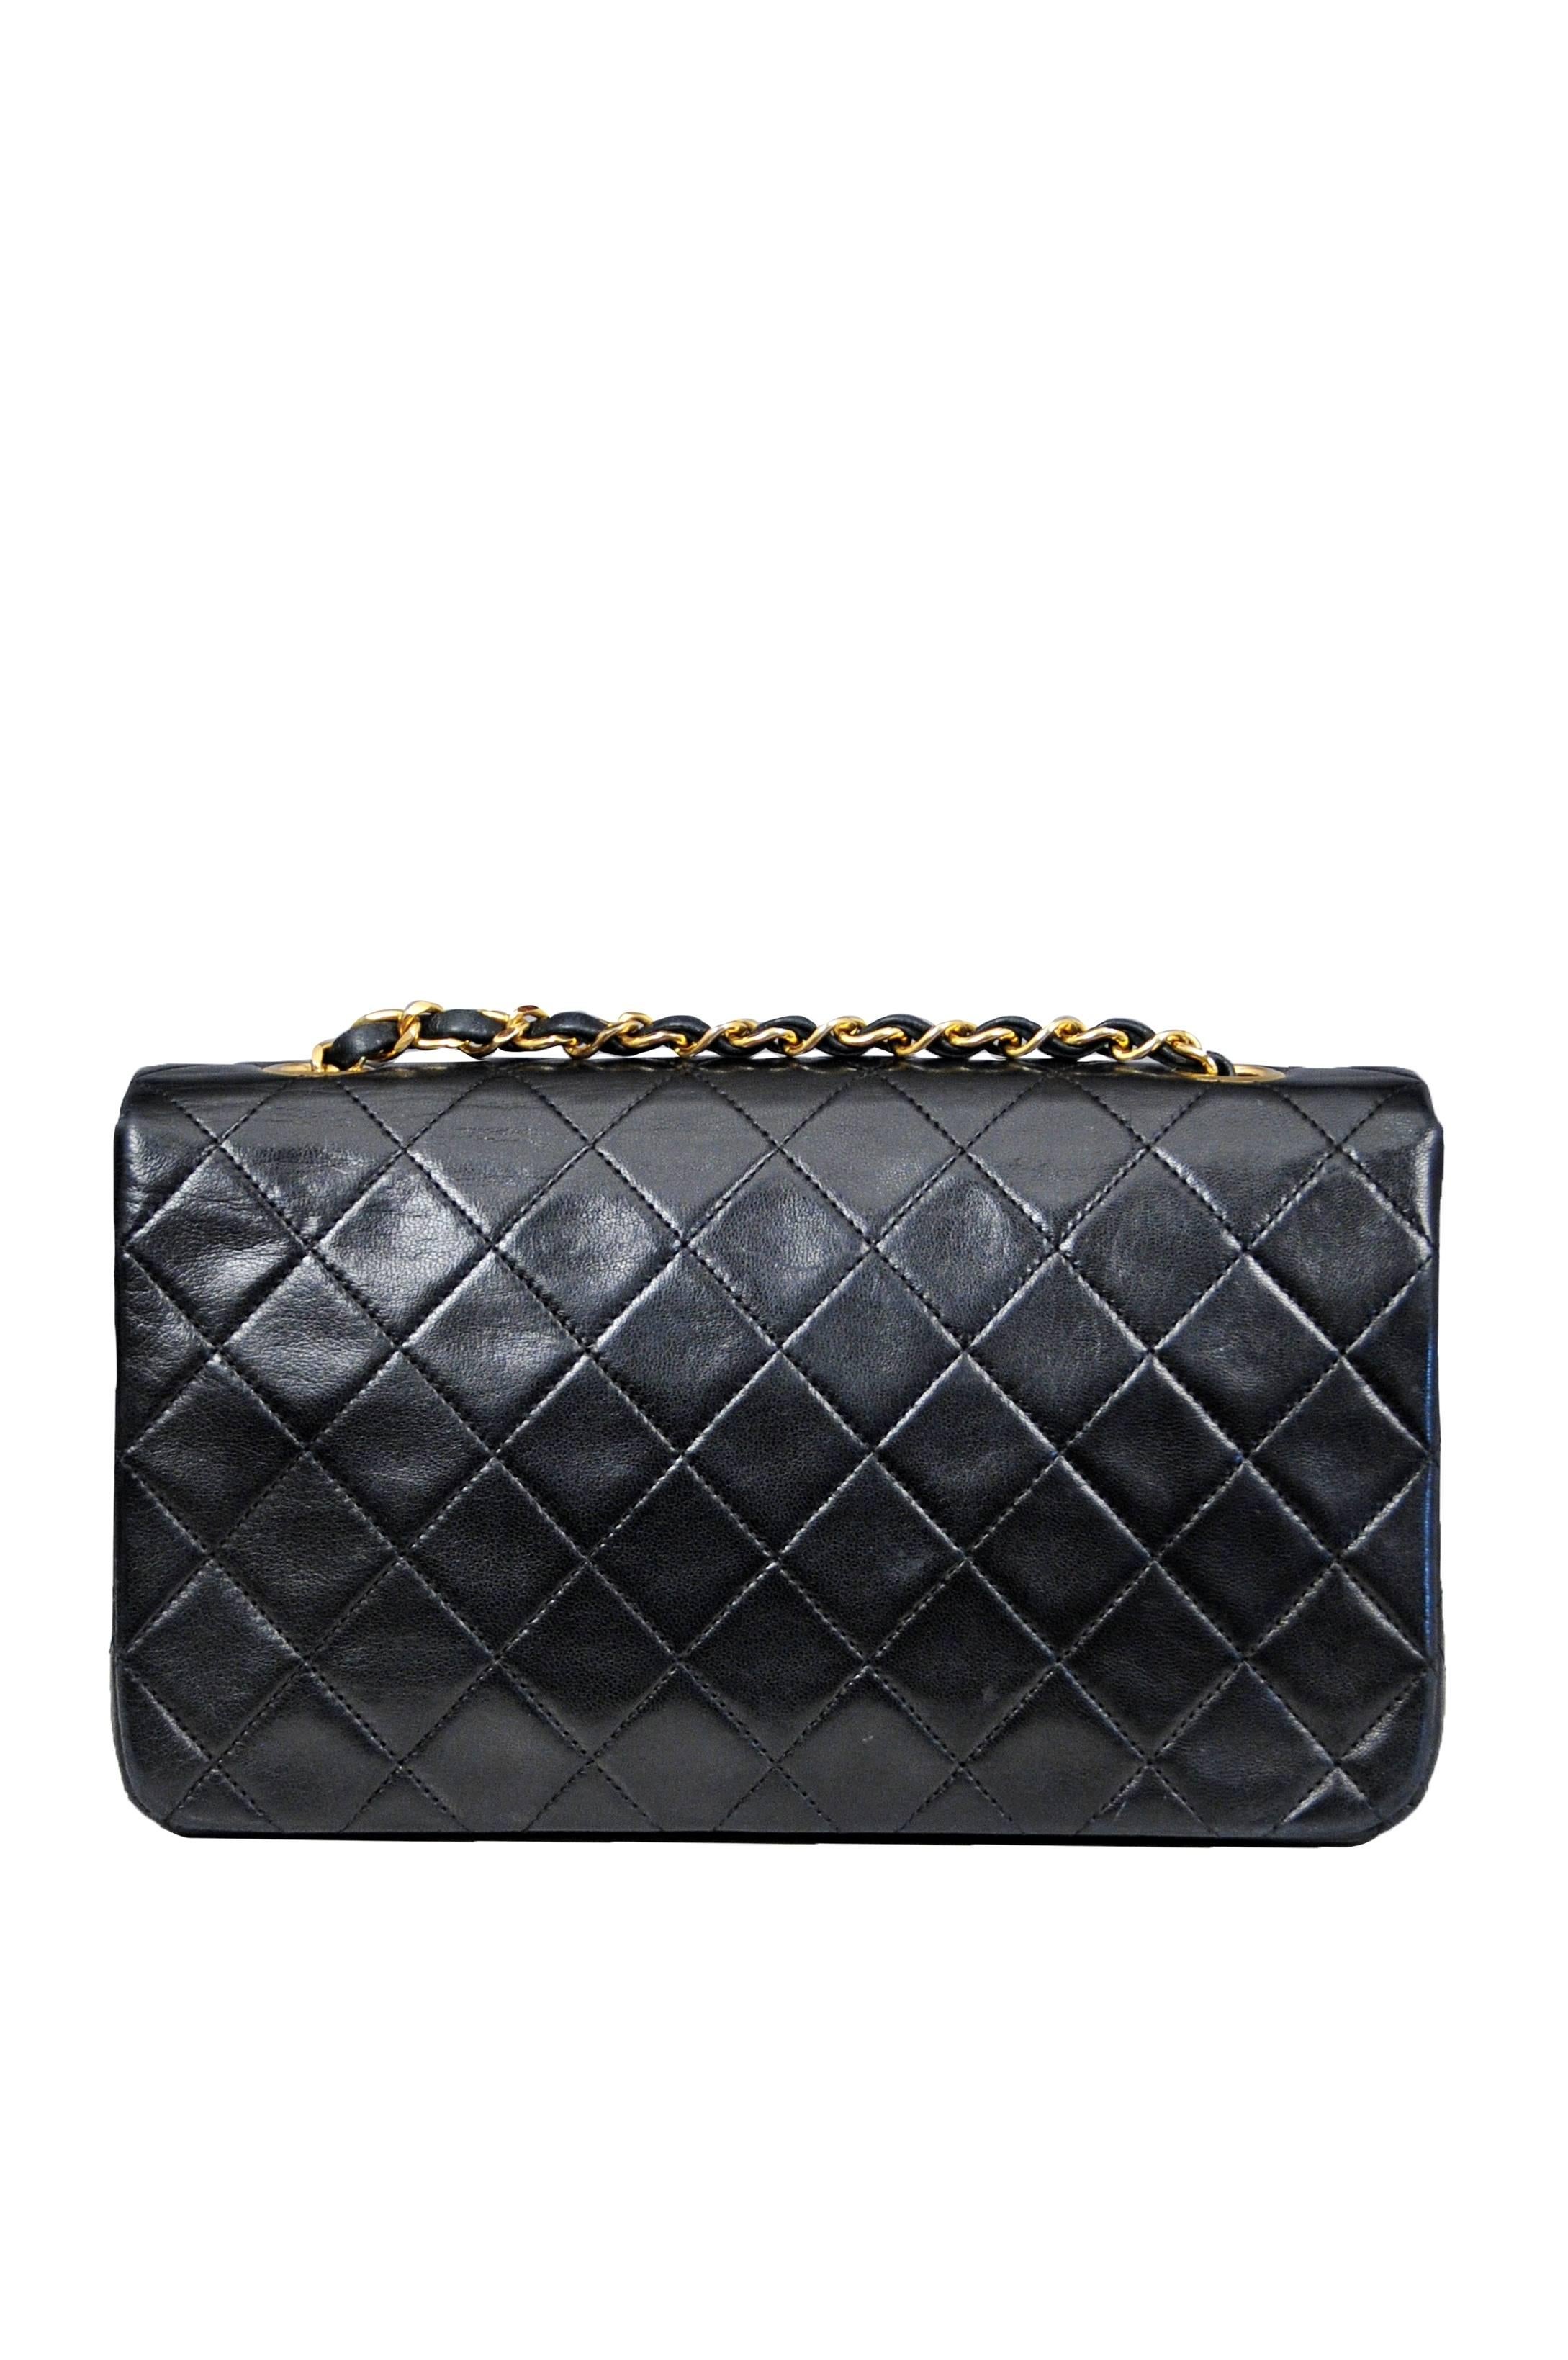 Vintage Chanel Classic three way bag in black quilted lambskin featuring burgundy leather interior lining, iconic leather and gold tone chain woven straps, two inside pockets, one inner hidden zip pocket, and a gold tone turn-lock closure at the